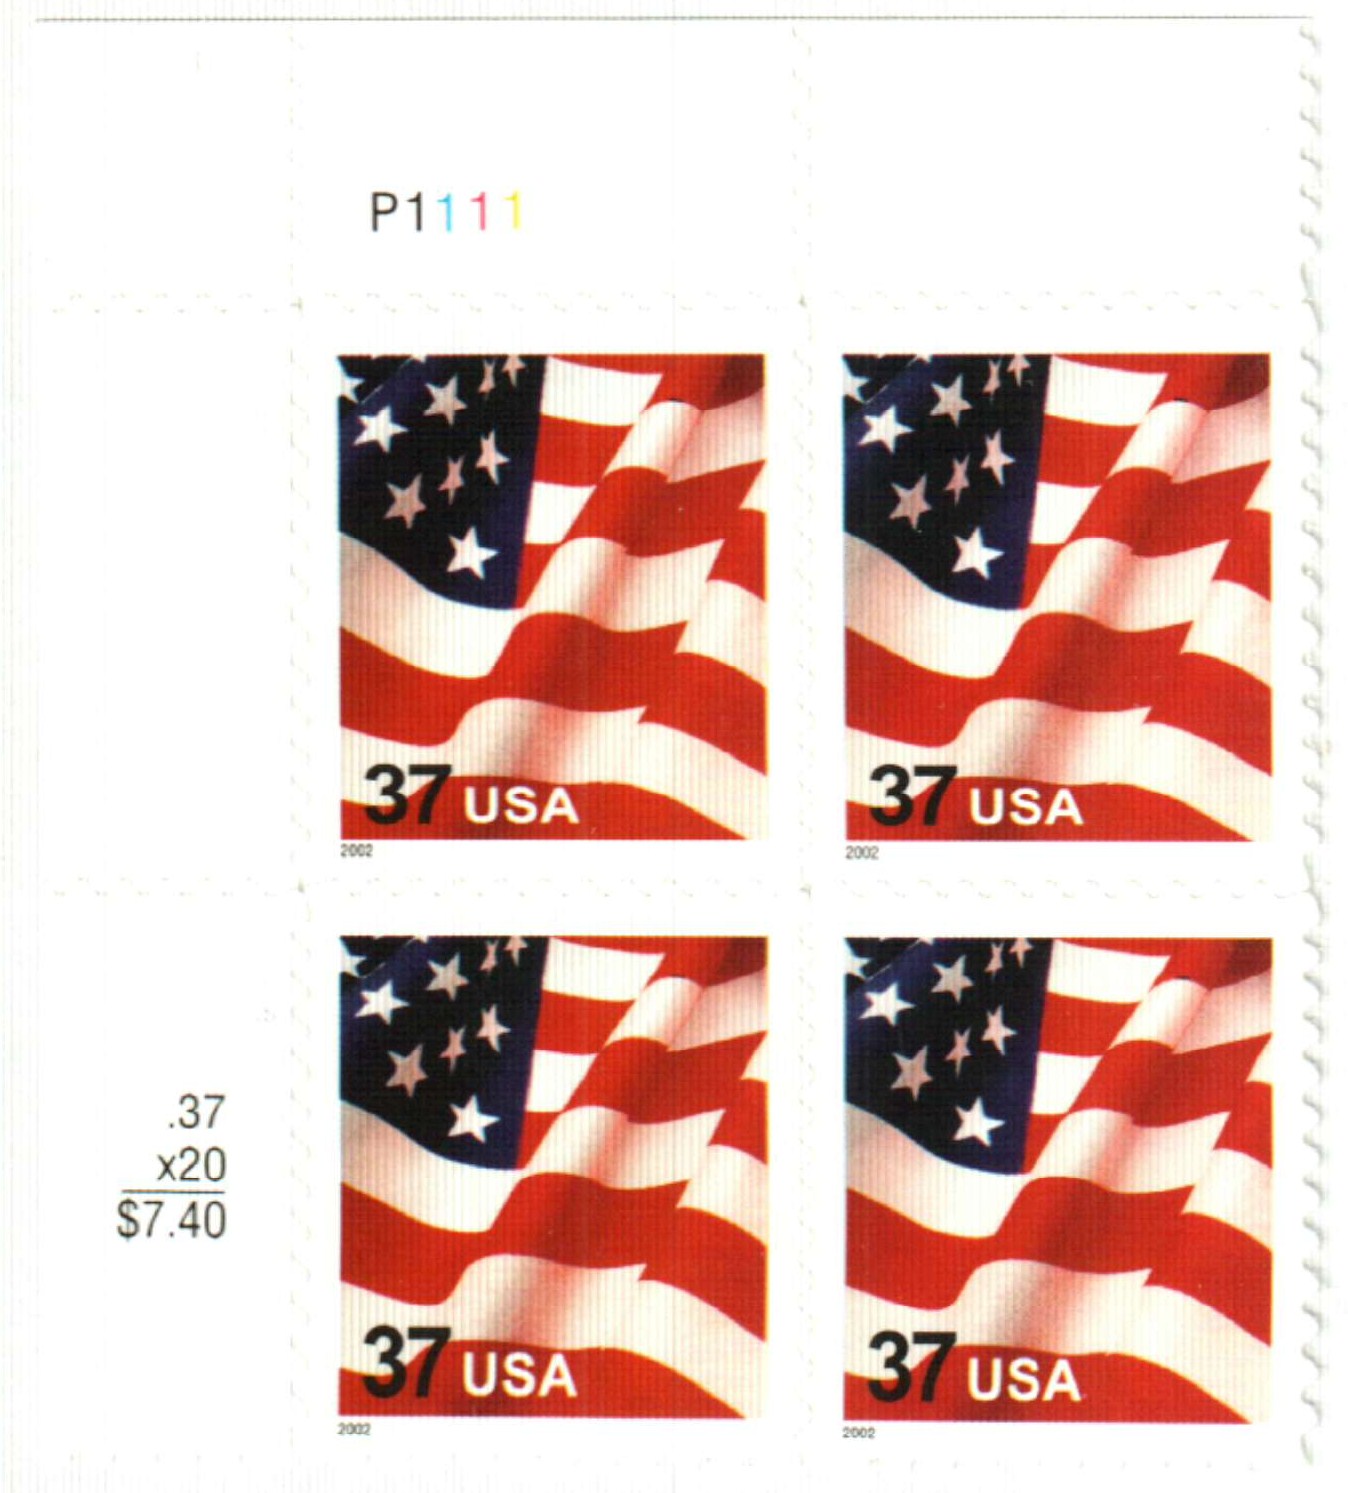 Hosport American Flag 2018 Stickers Red White Blue Forever USA Postage Stamps for DIY Scrapbooking, Size: 25